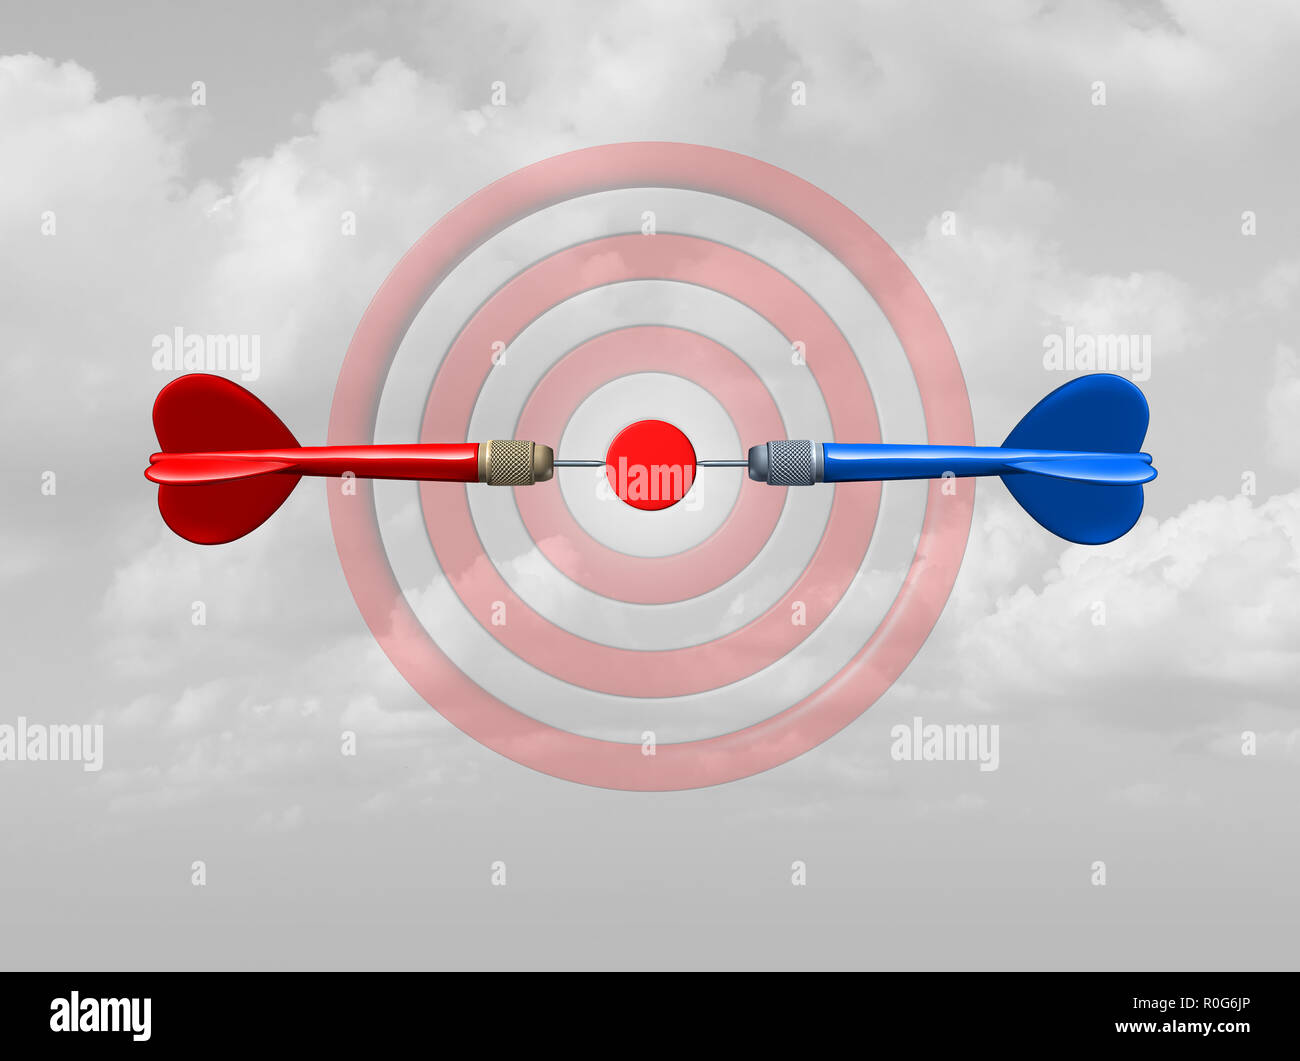 Concept of competition as a business success symbol as rivals compete for the same target bullseye as dart arrows focused on the central goal. Stock Photo